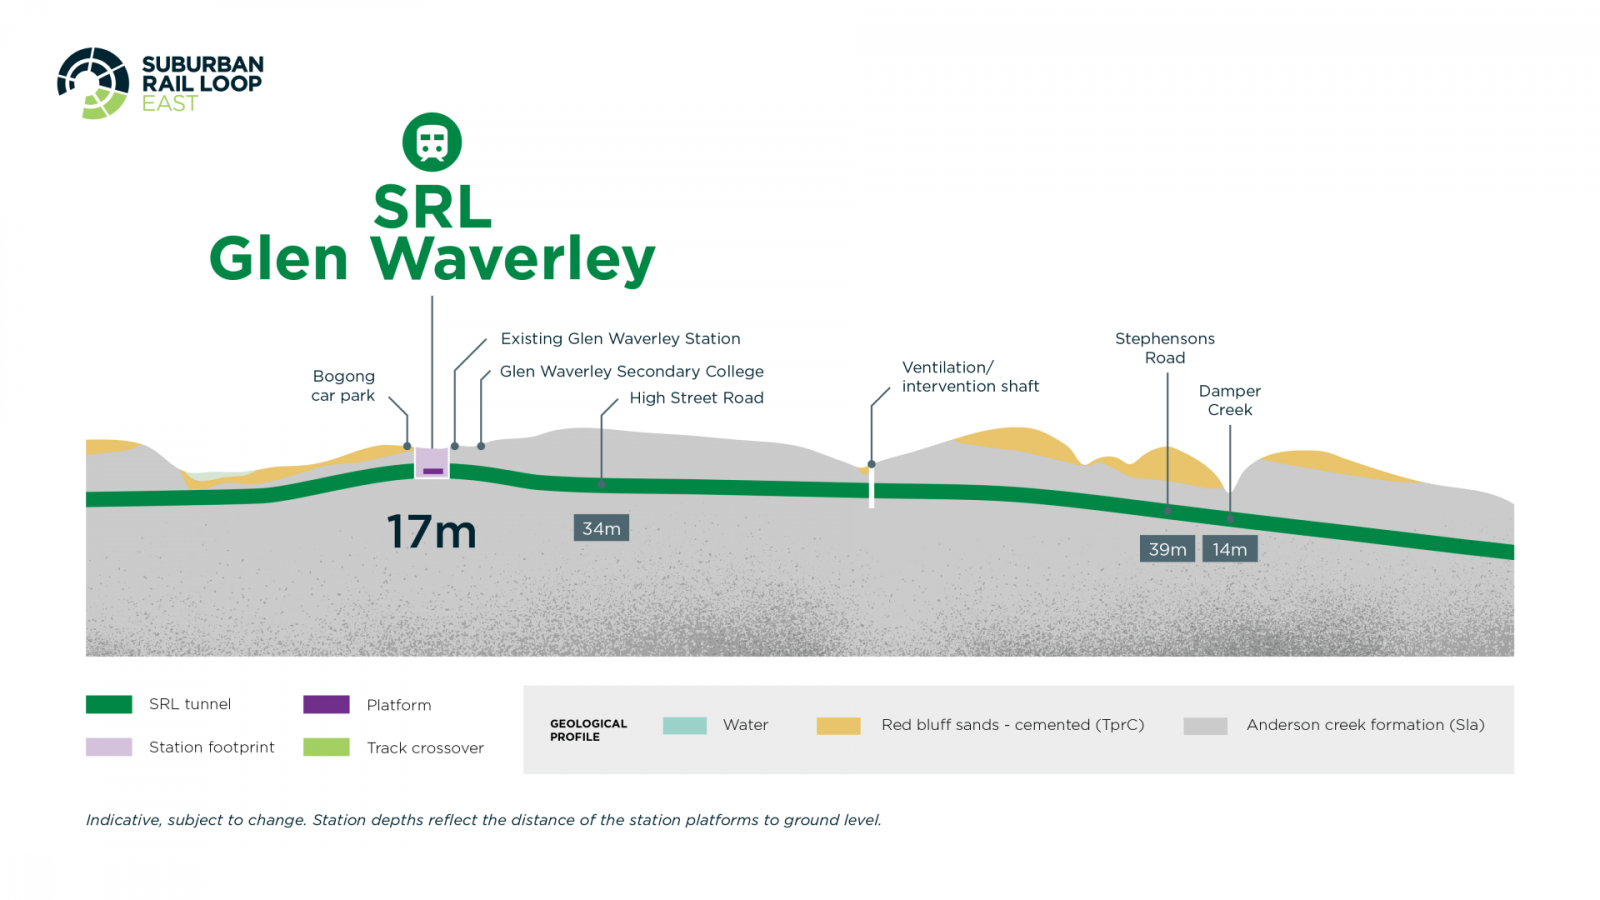 Diagram: The path of SRL East tunnel beneath Glen Waverley. Depth is 34m to 39m to 14m.